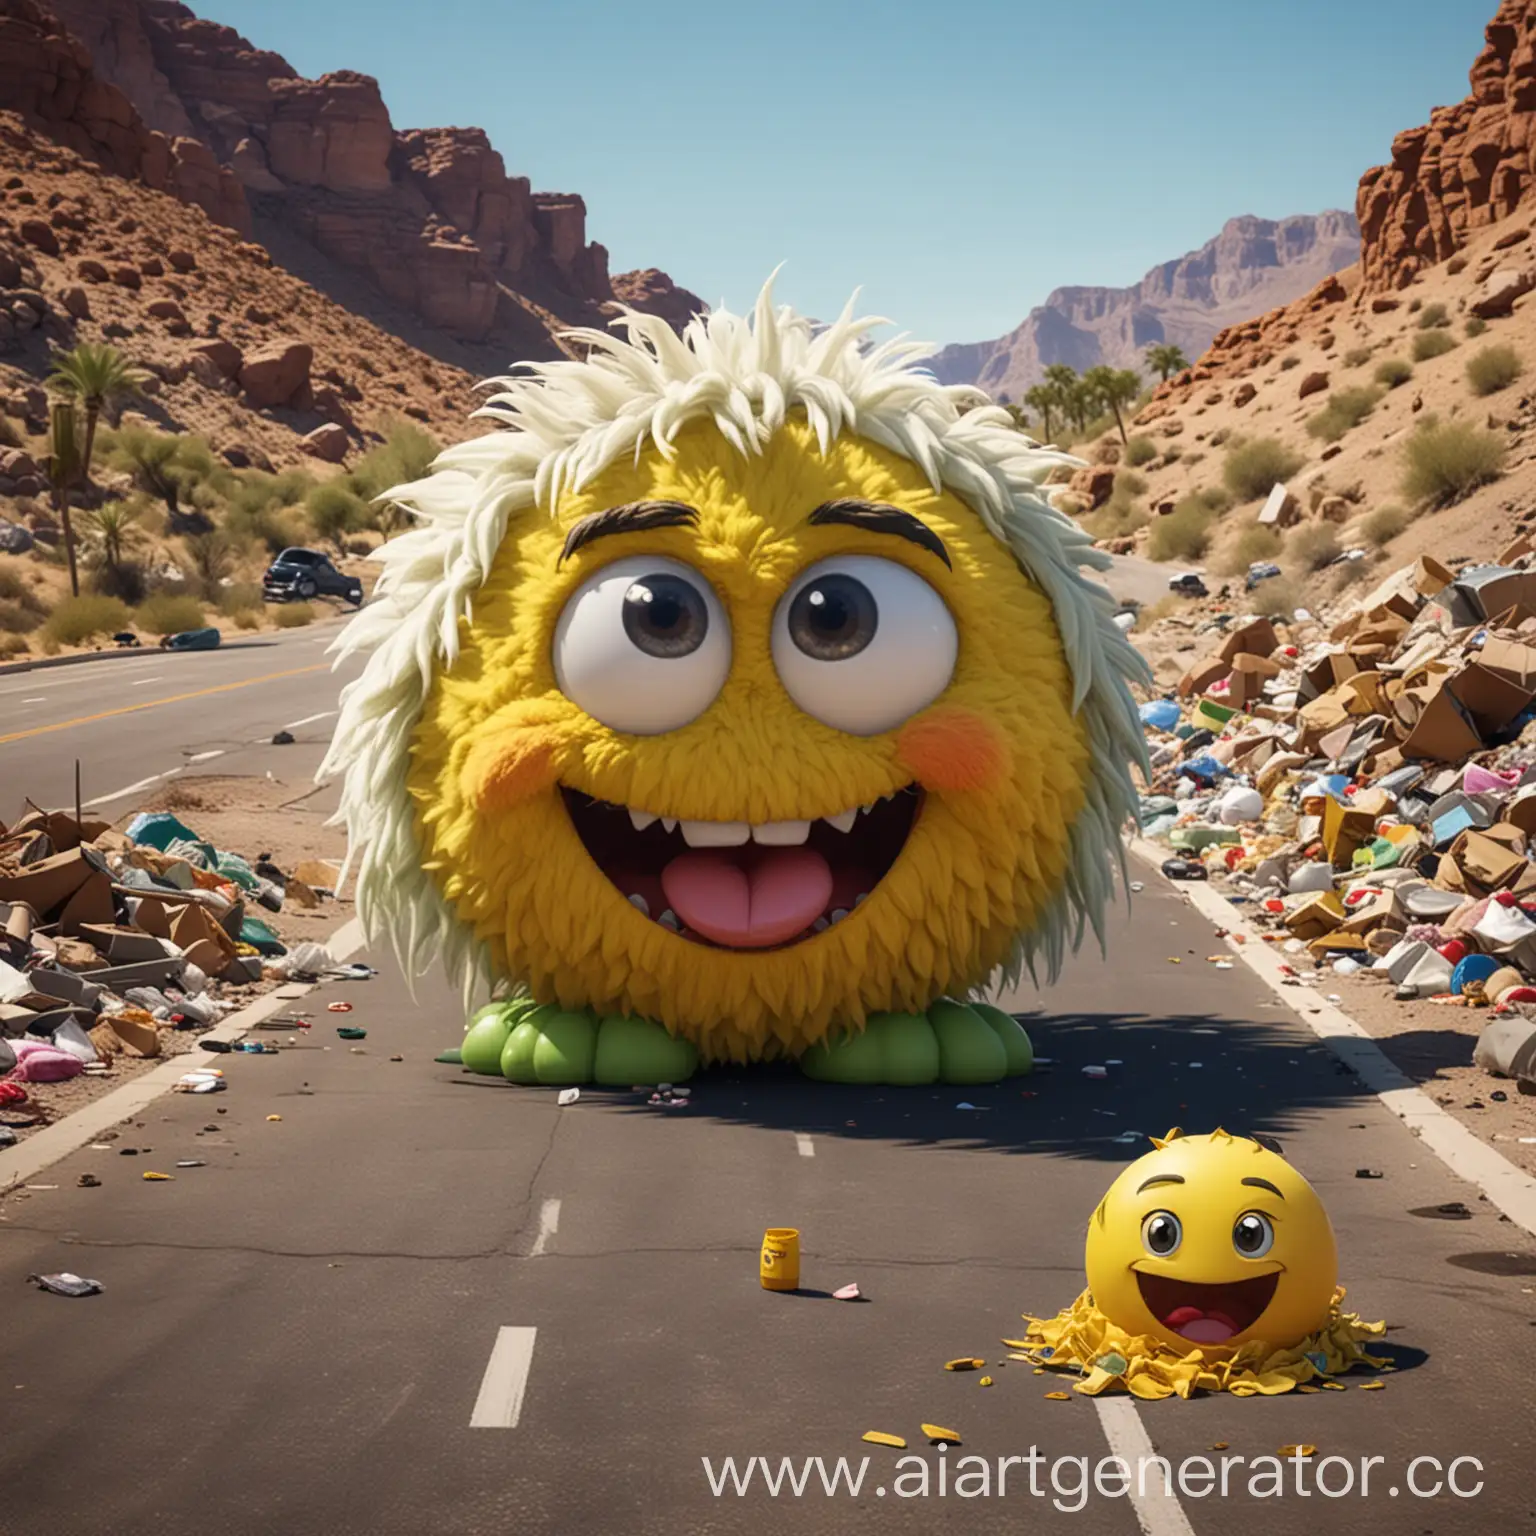 Sunny-Road-Encounter-Giant-Emoji-Monster-Confronts-Garbage-Pile